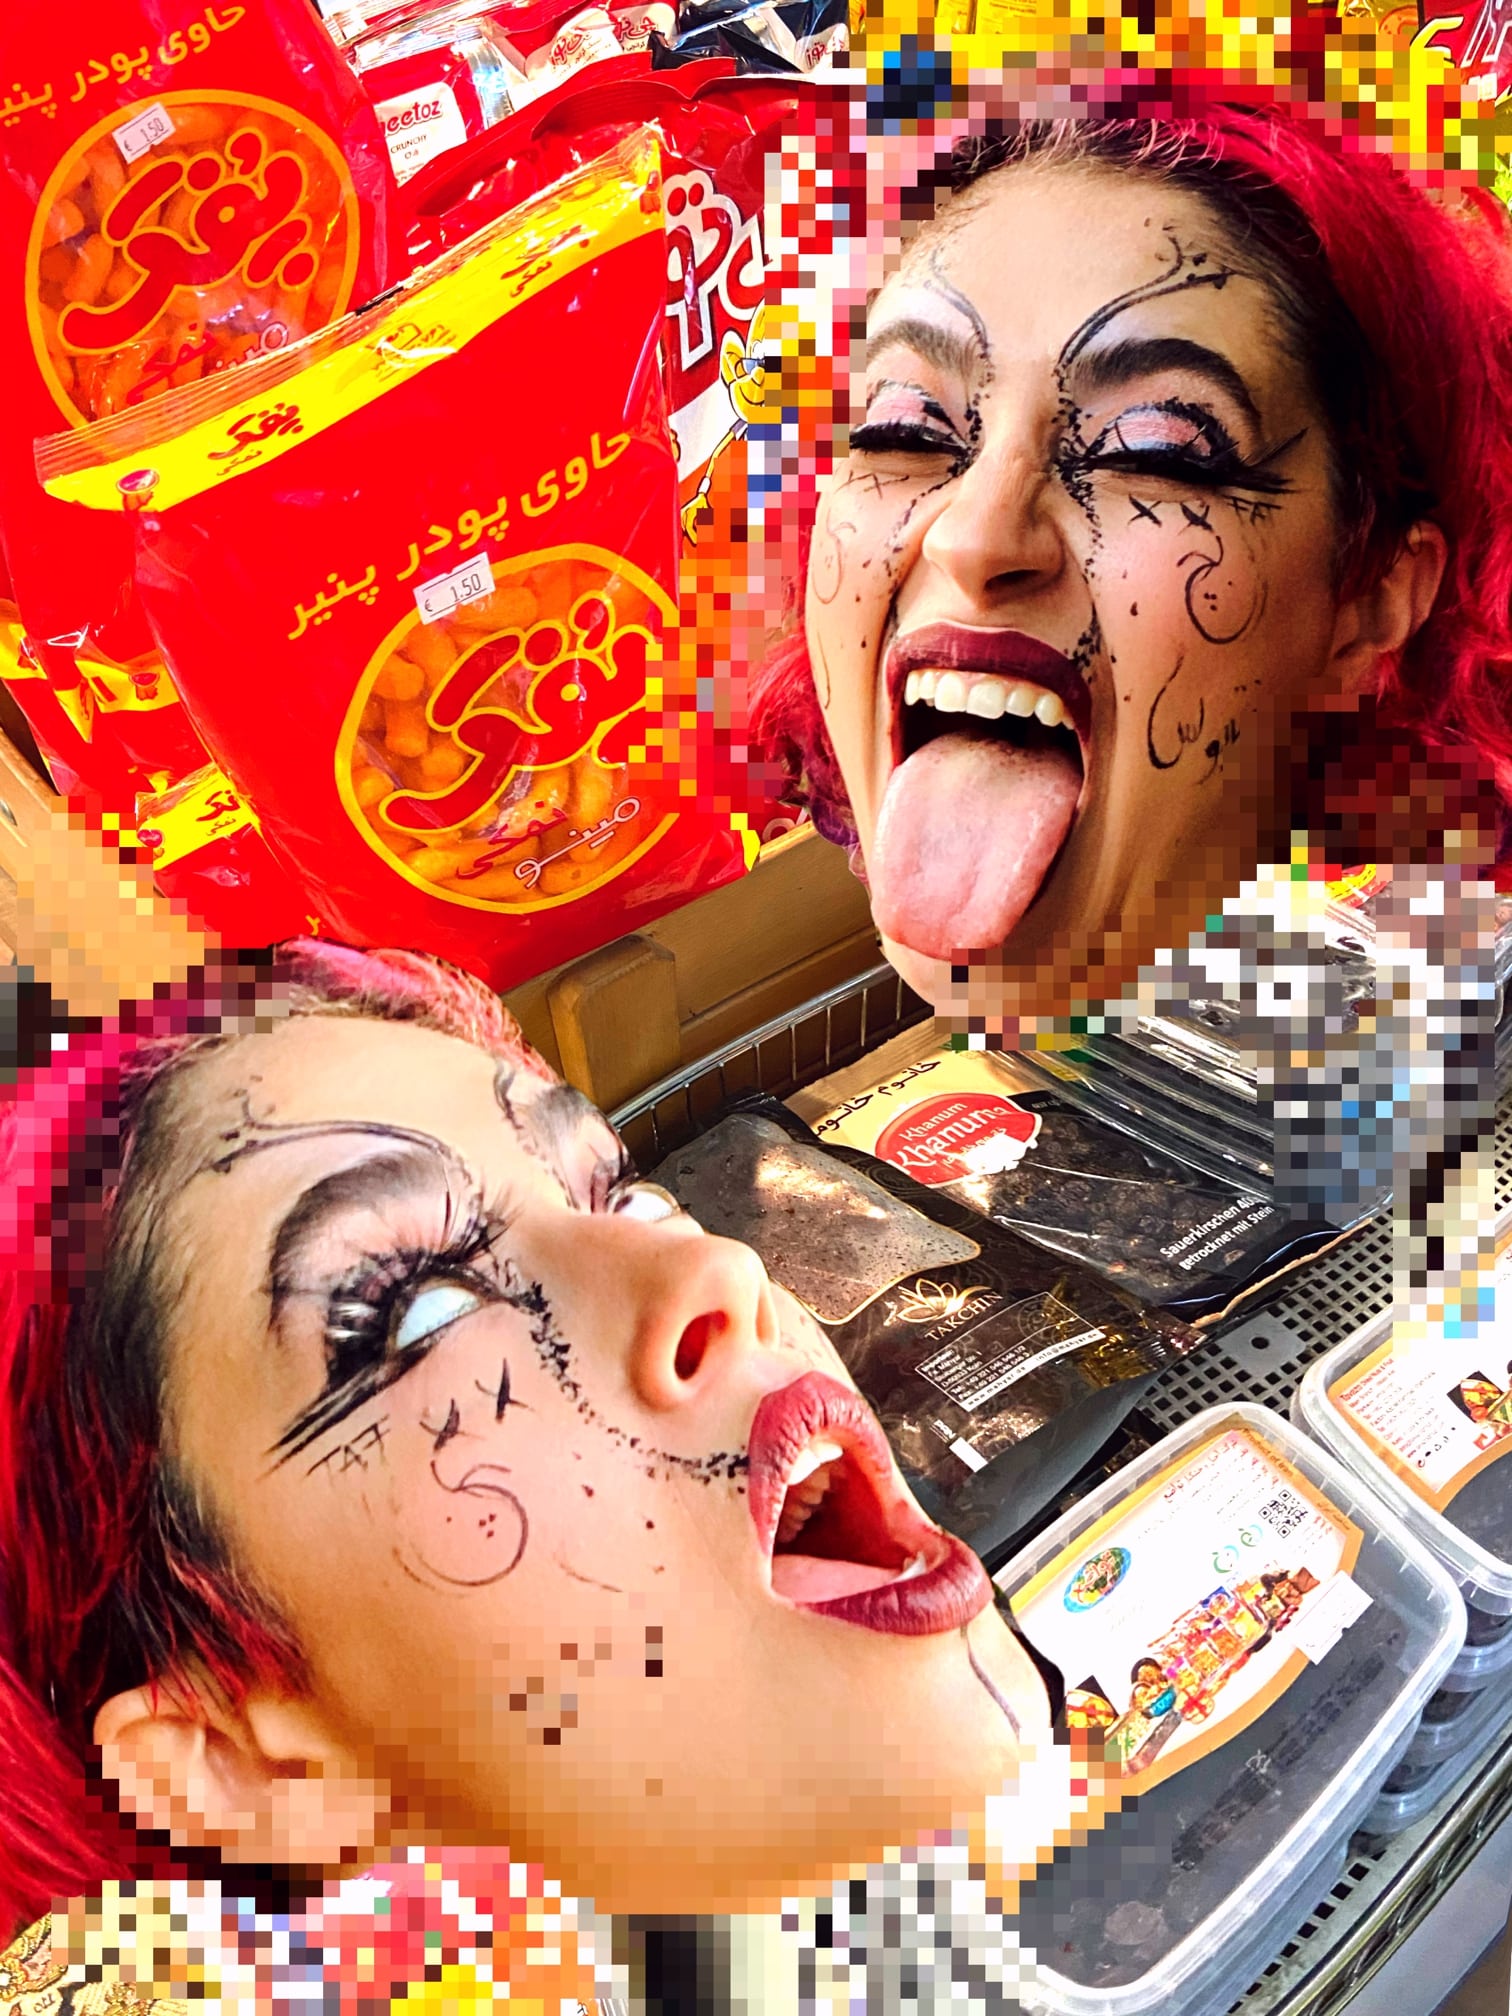 Two fictional faces with makeup and pink hair are visible in the top right and bottom left of the image. The person above is squinting their eyes and sticking out a long tongue. The bottom person has their mouth open and is looking up. In the background are Iranian sweets.